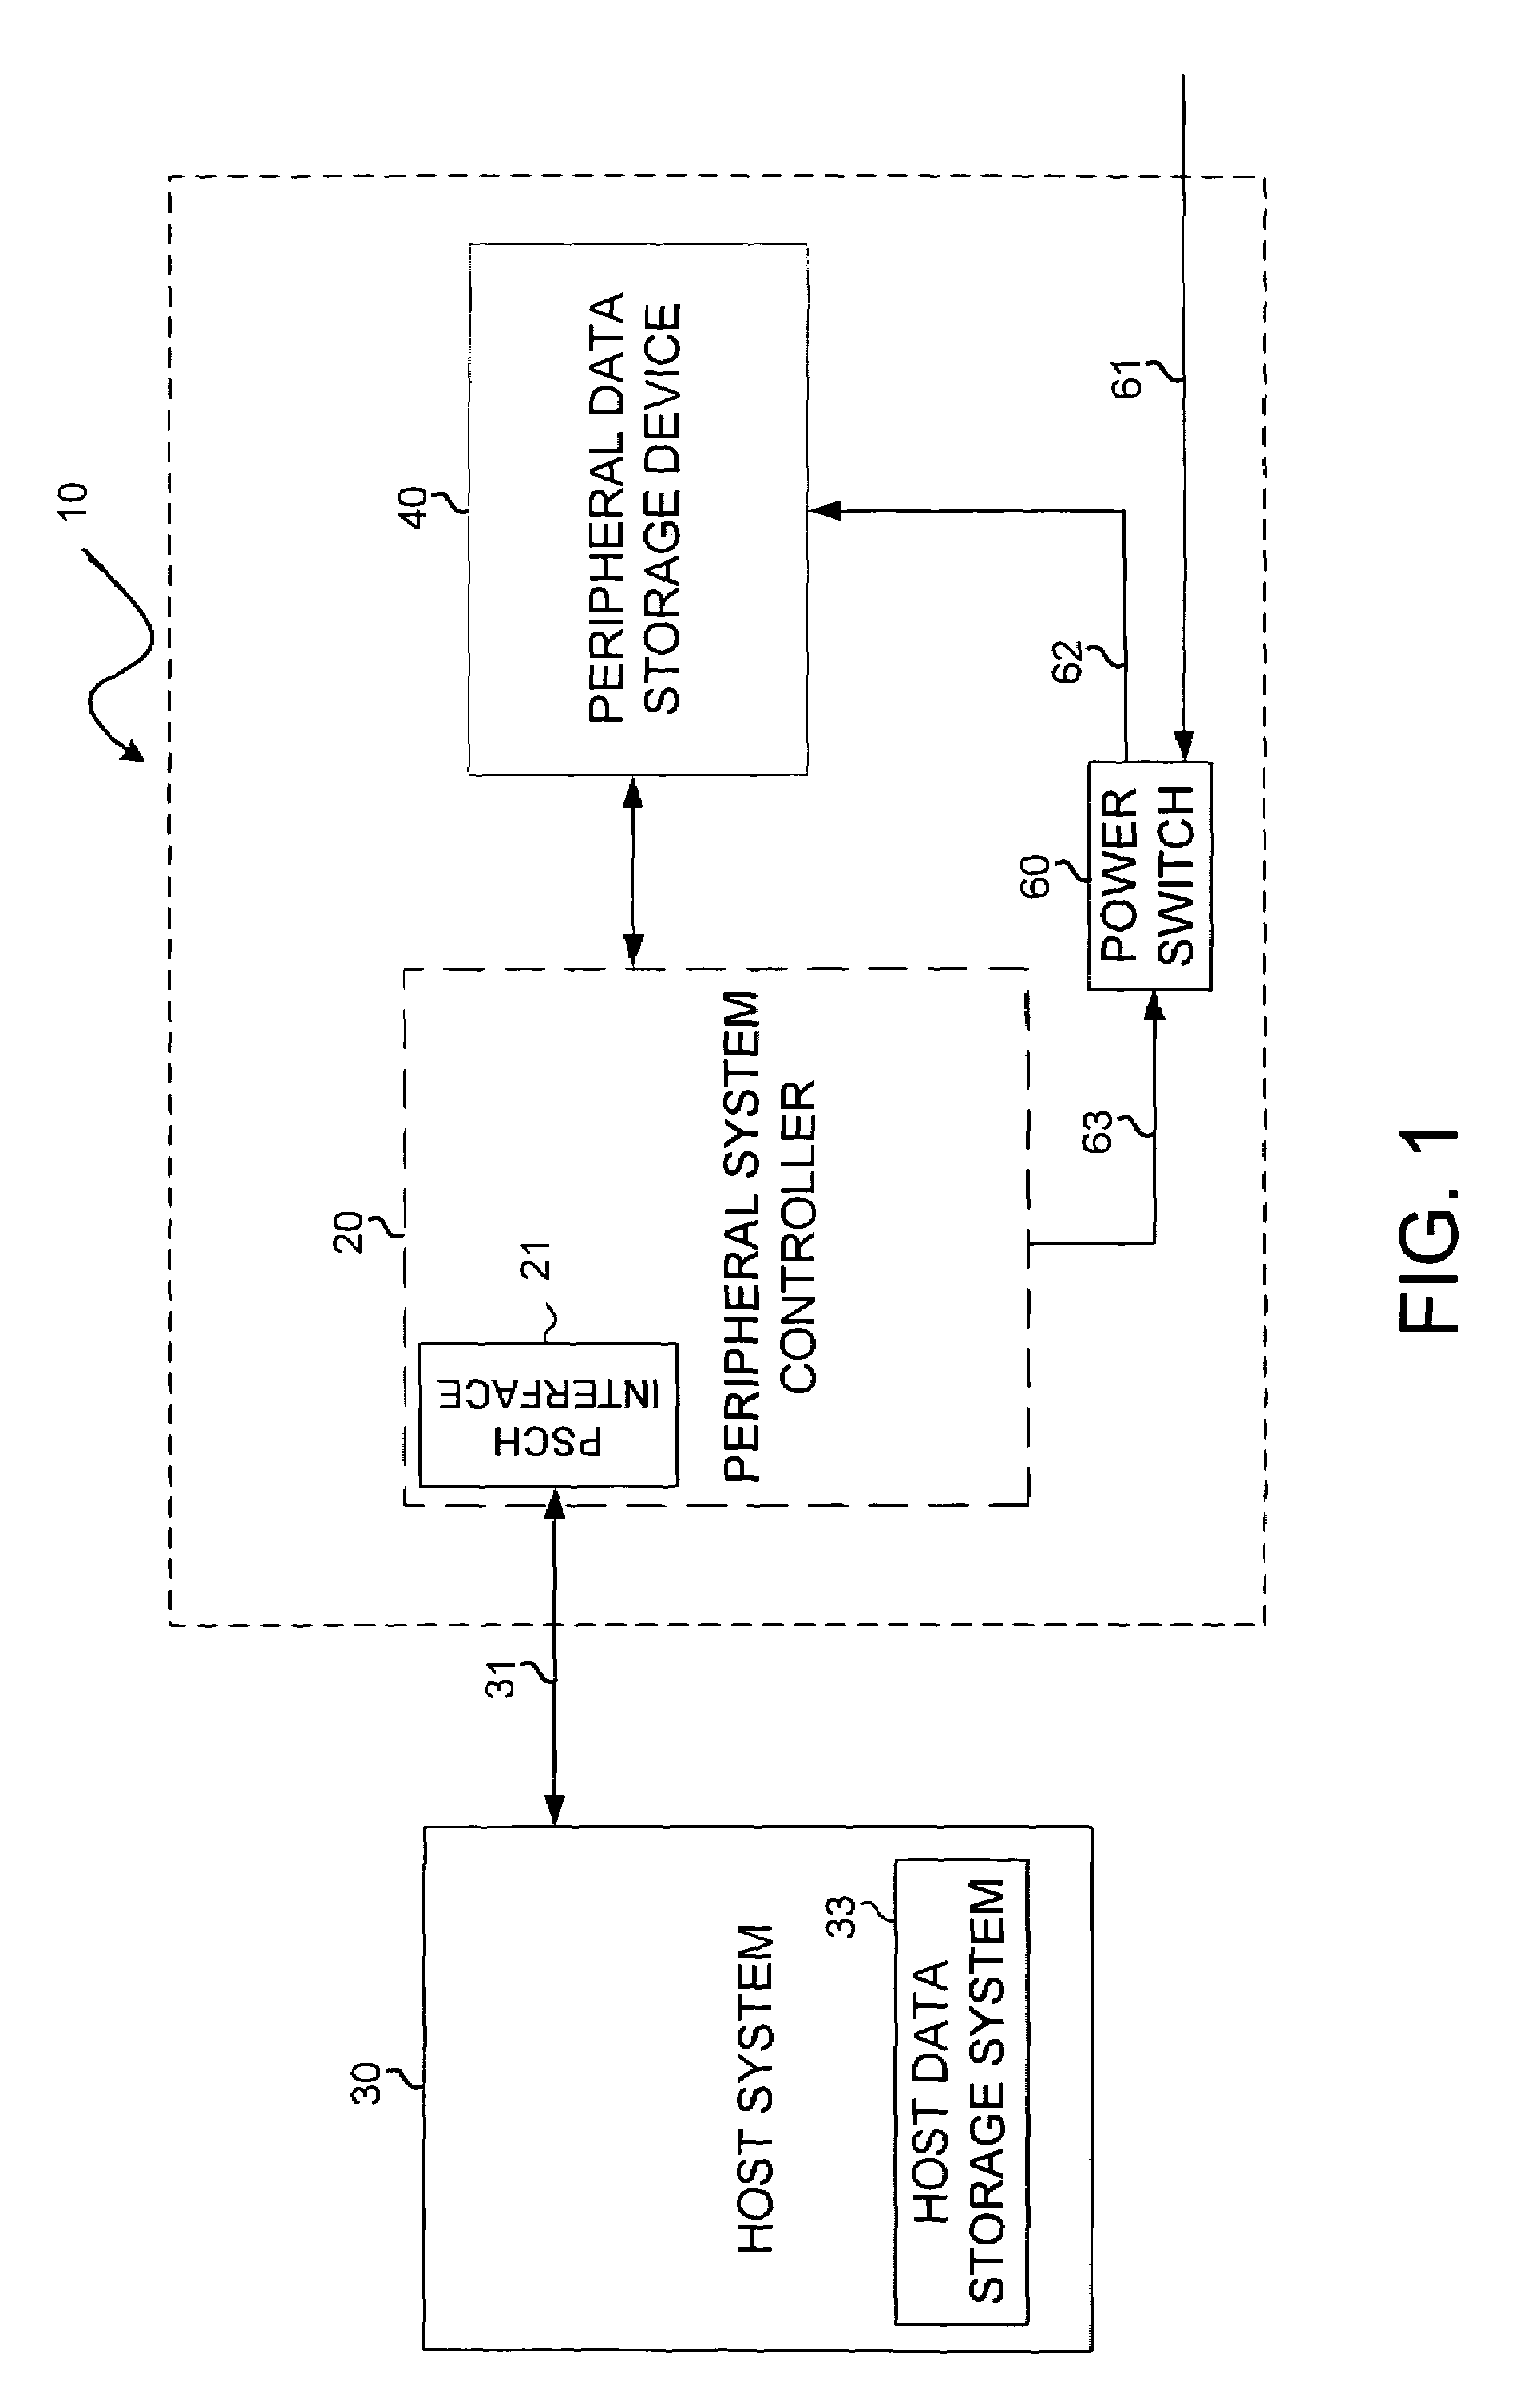 Remote power cycling of peripheral data storage system